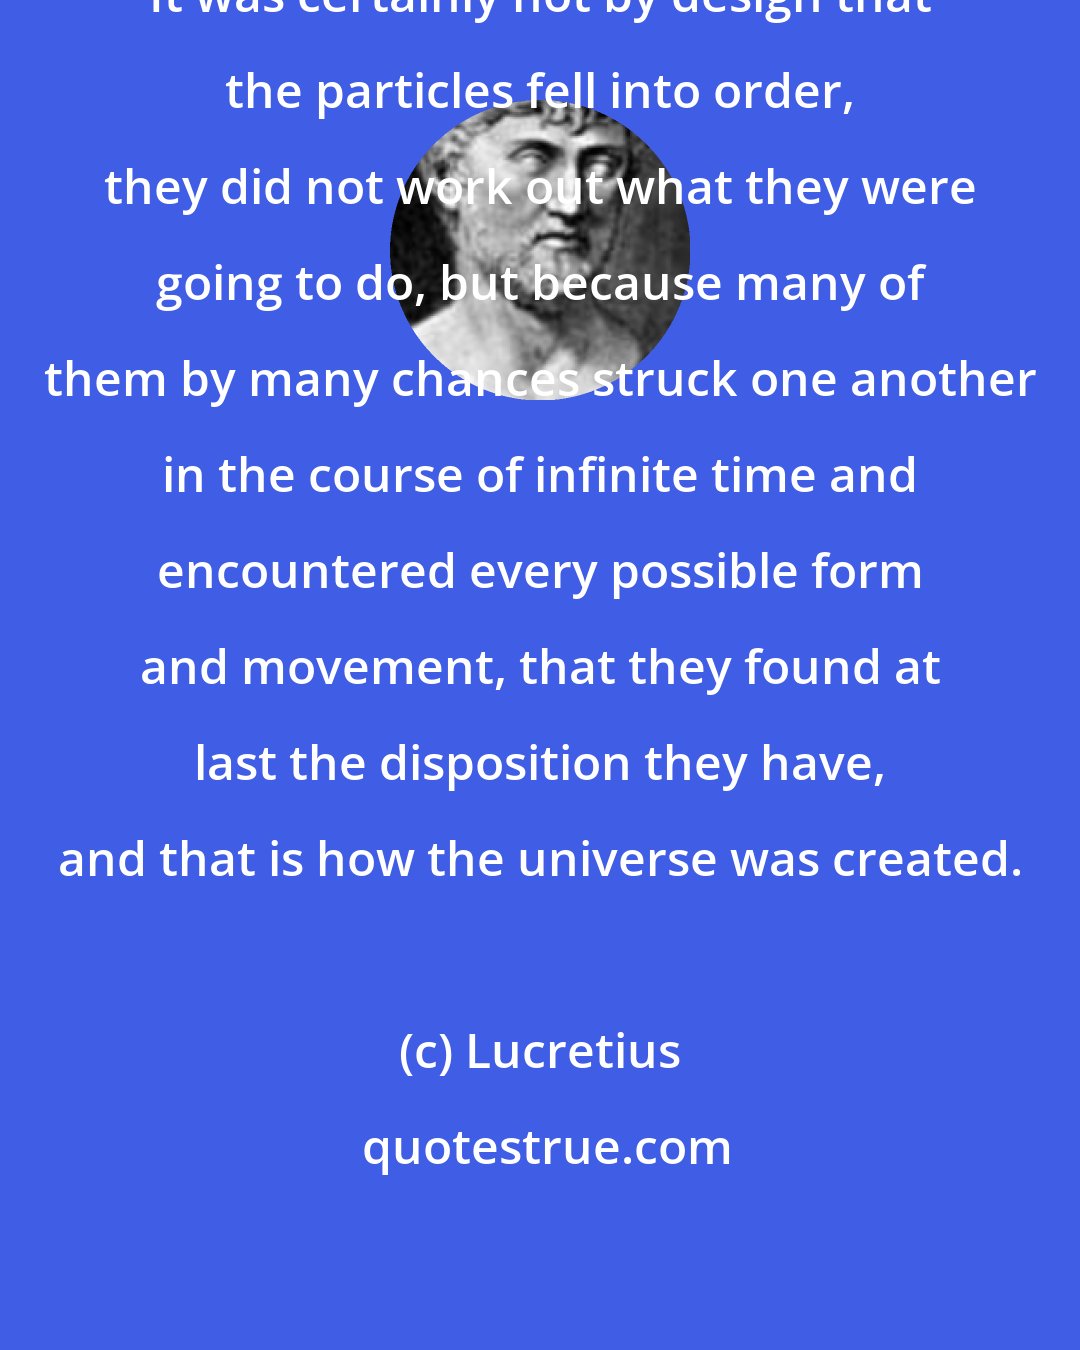 Lucretius: It was certainly not by design that the particles fell into order, they did not work out what they were going to do, but because many of them by many chances struck one another in the course of infinite time and encountered every possible form and movement, that they found at last the disposition they have, and that is how the universe was created.